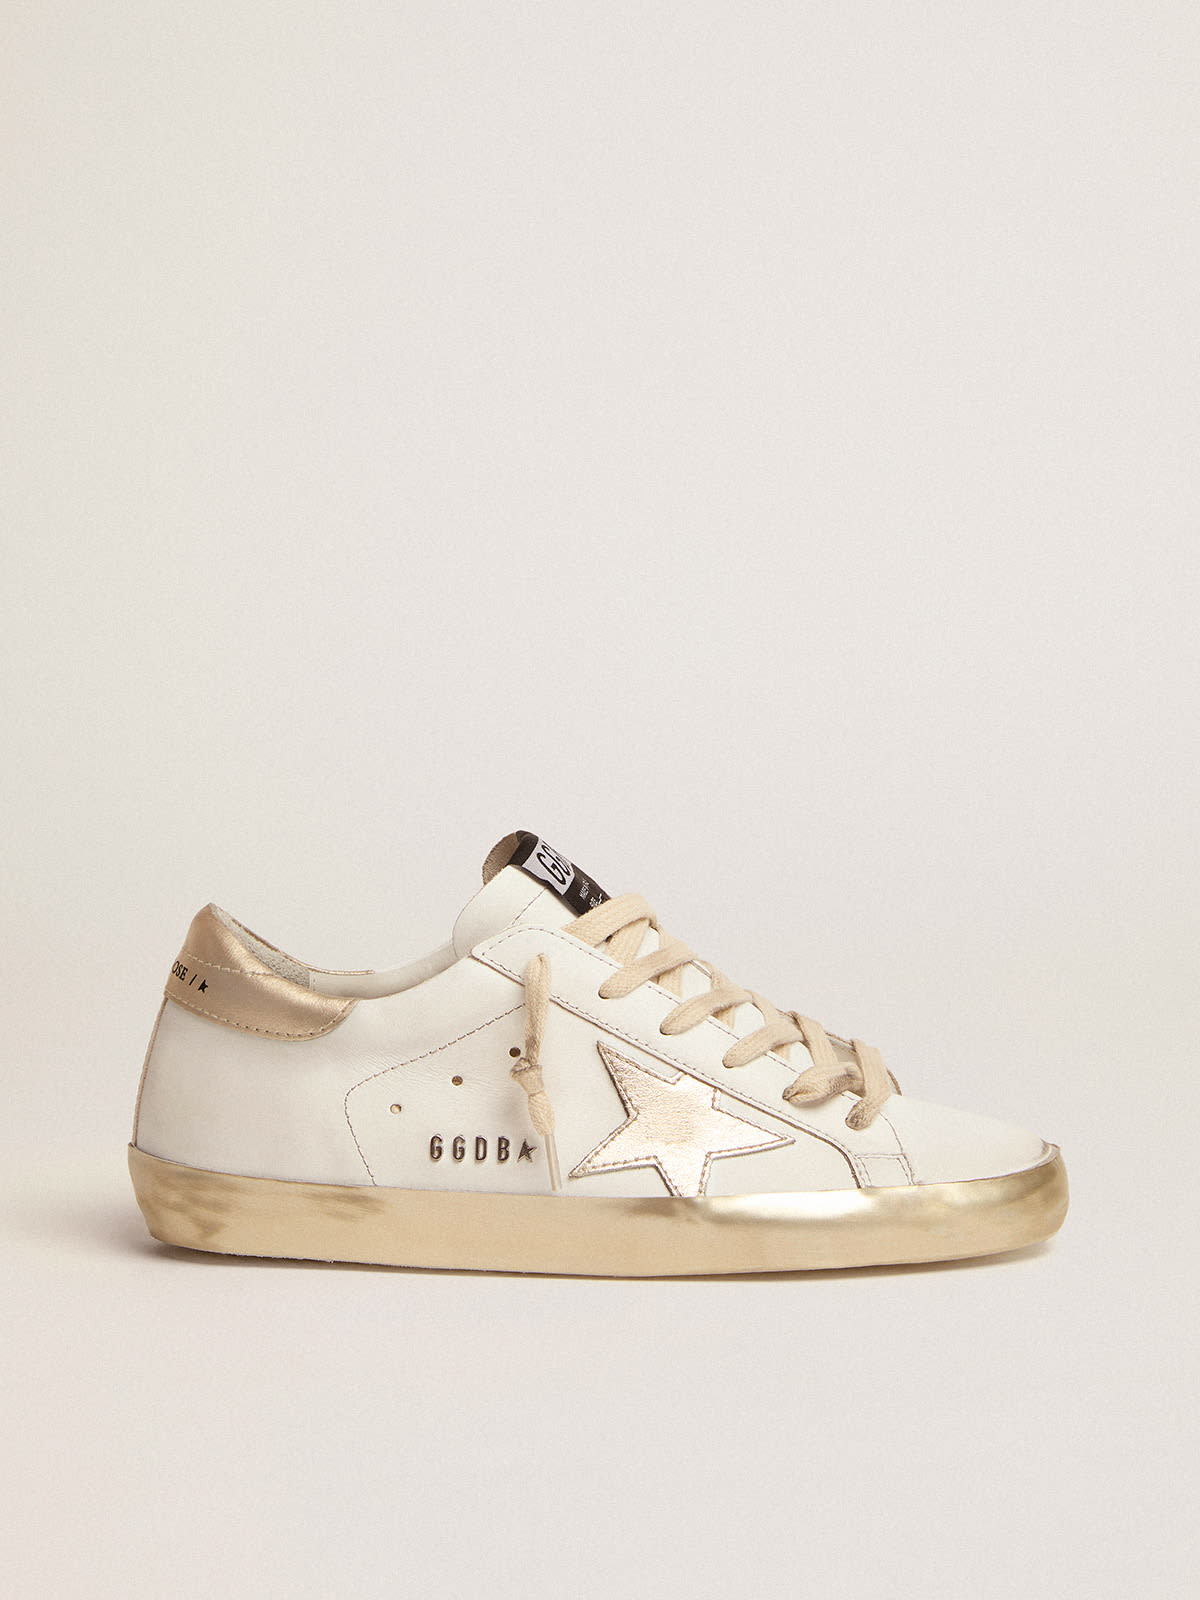 Ball Star LTD sneakers in ivory leather with pink and black zebra 